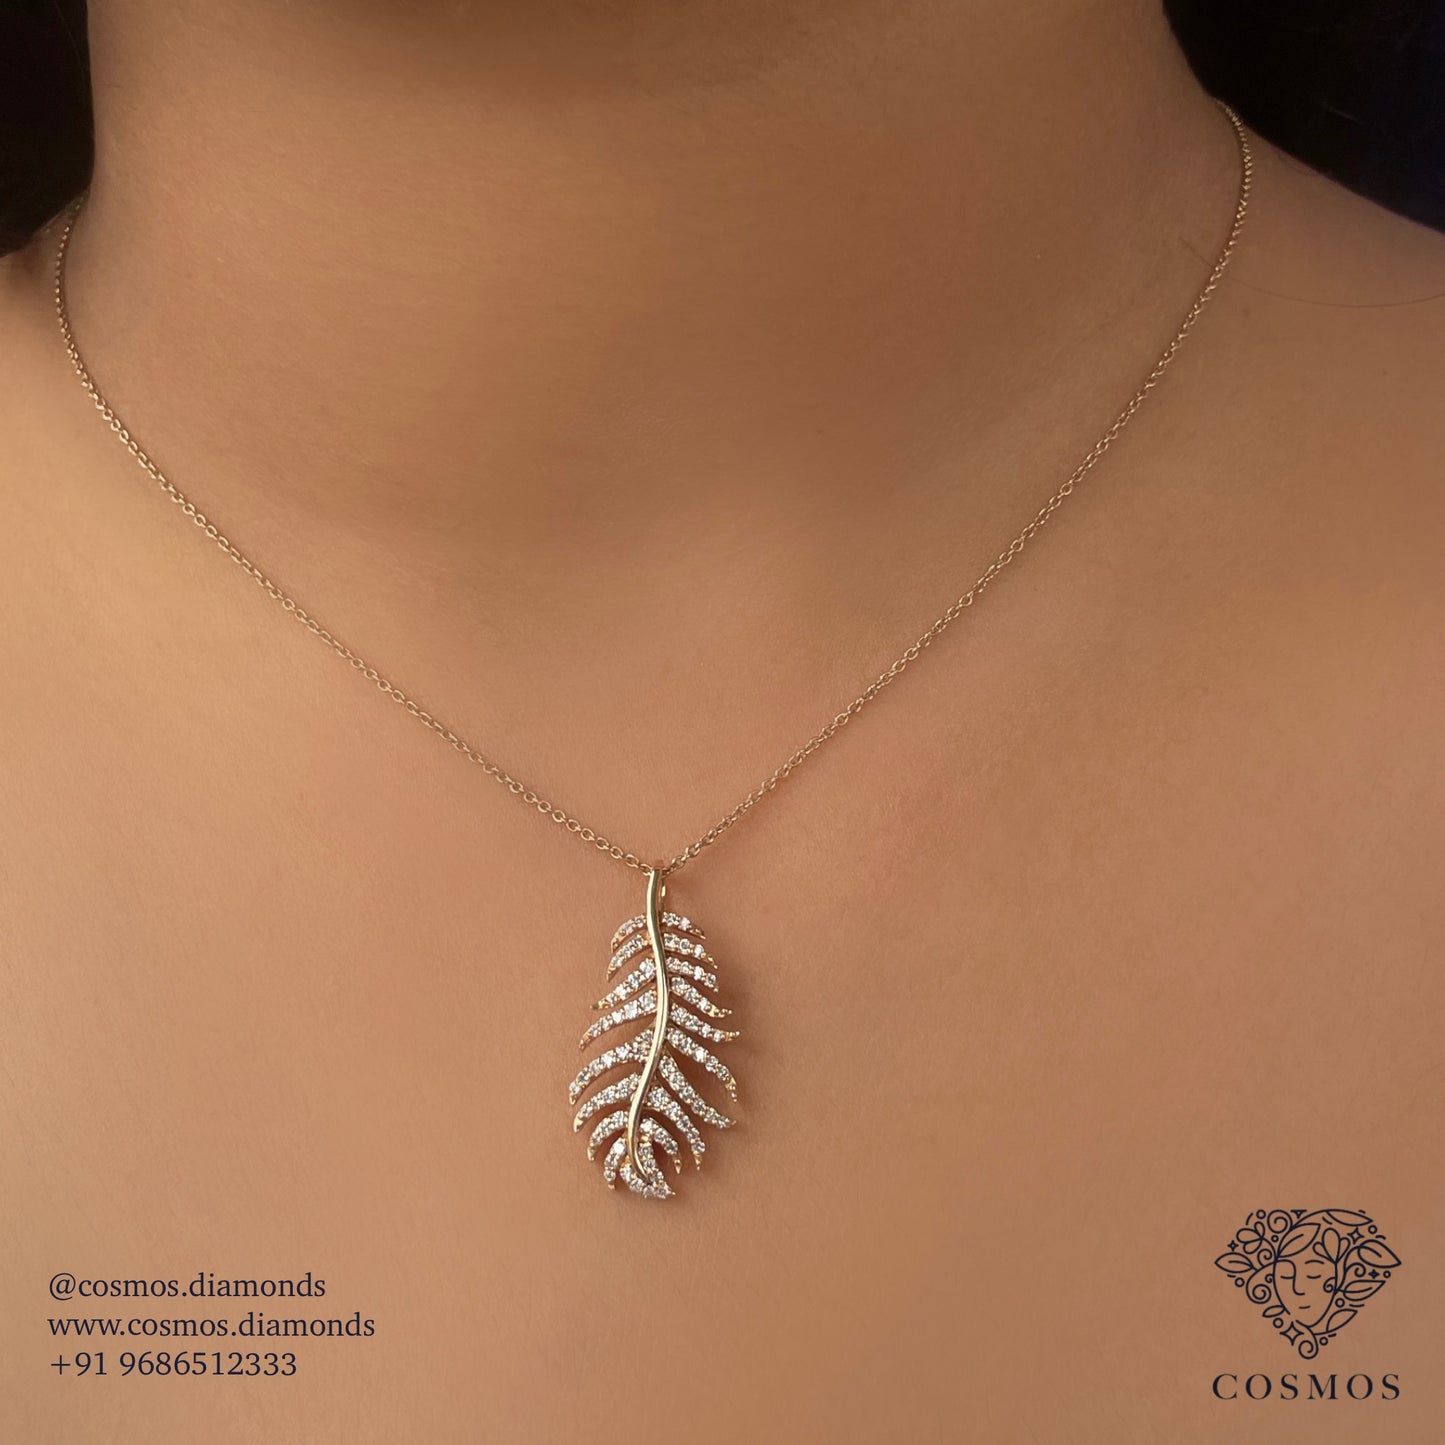 feather pendant, dream feather pendant, gold pendant, diamond pendant, cosmos diamonds, pendants online, jewellery online